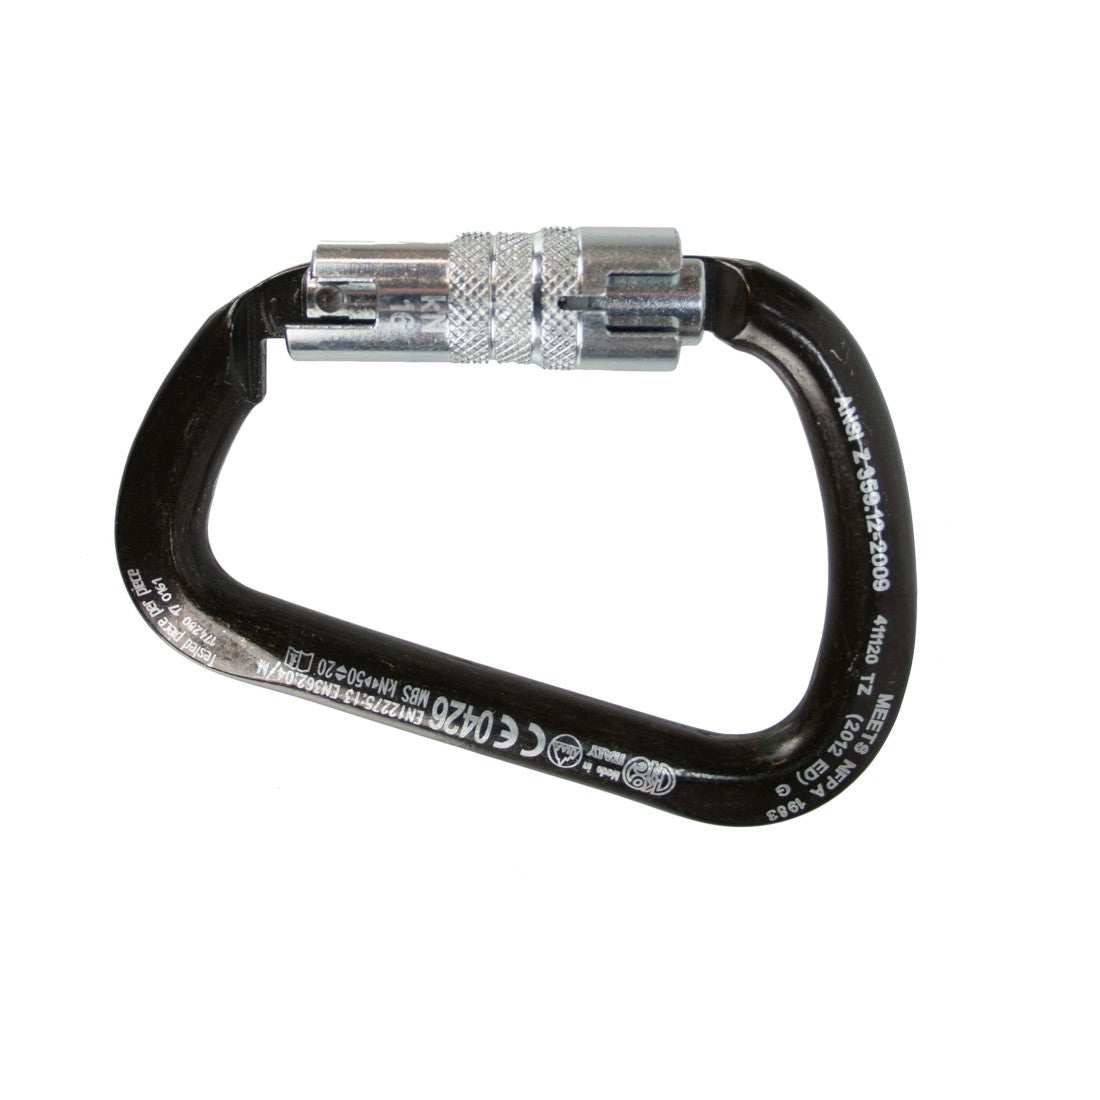 KONG ANSI Steel Carabiner Twist Lock - Extra Large - On Back View